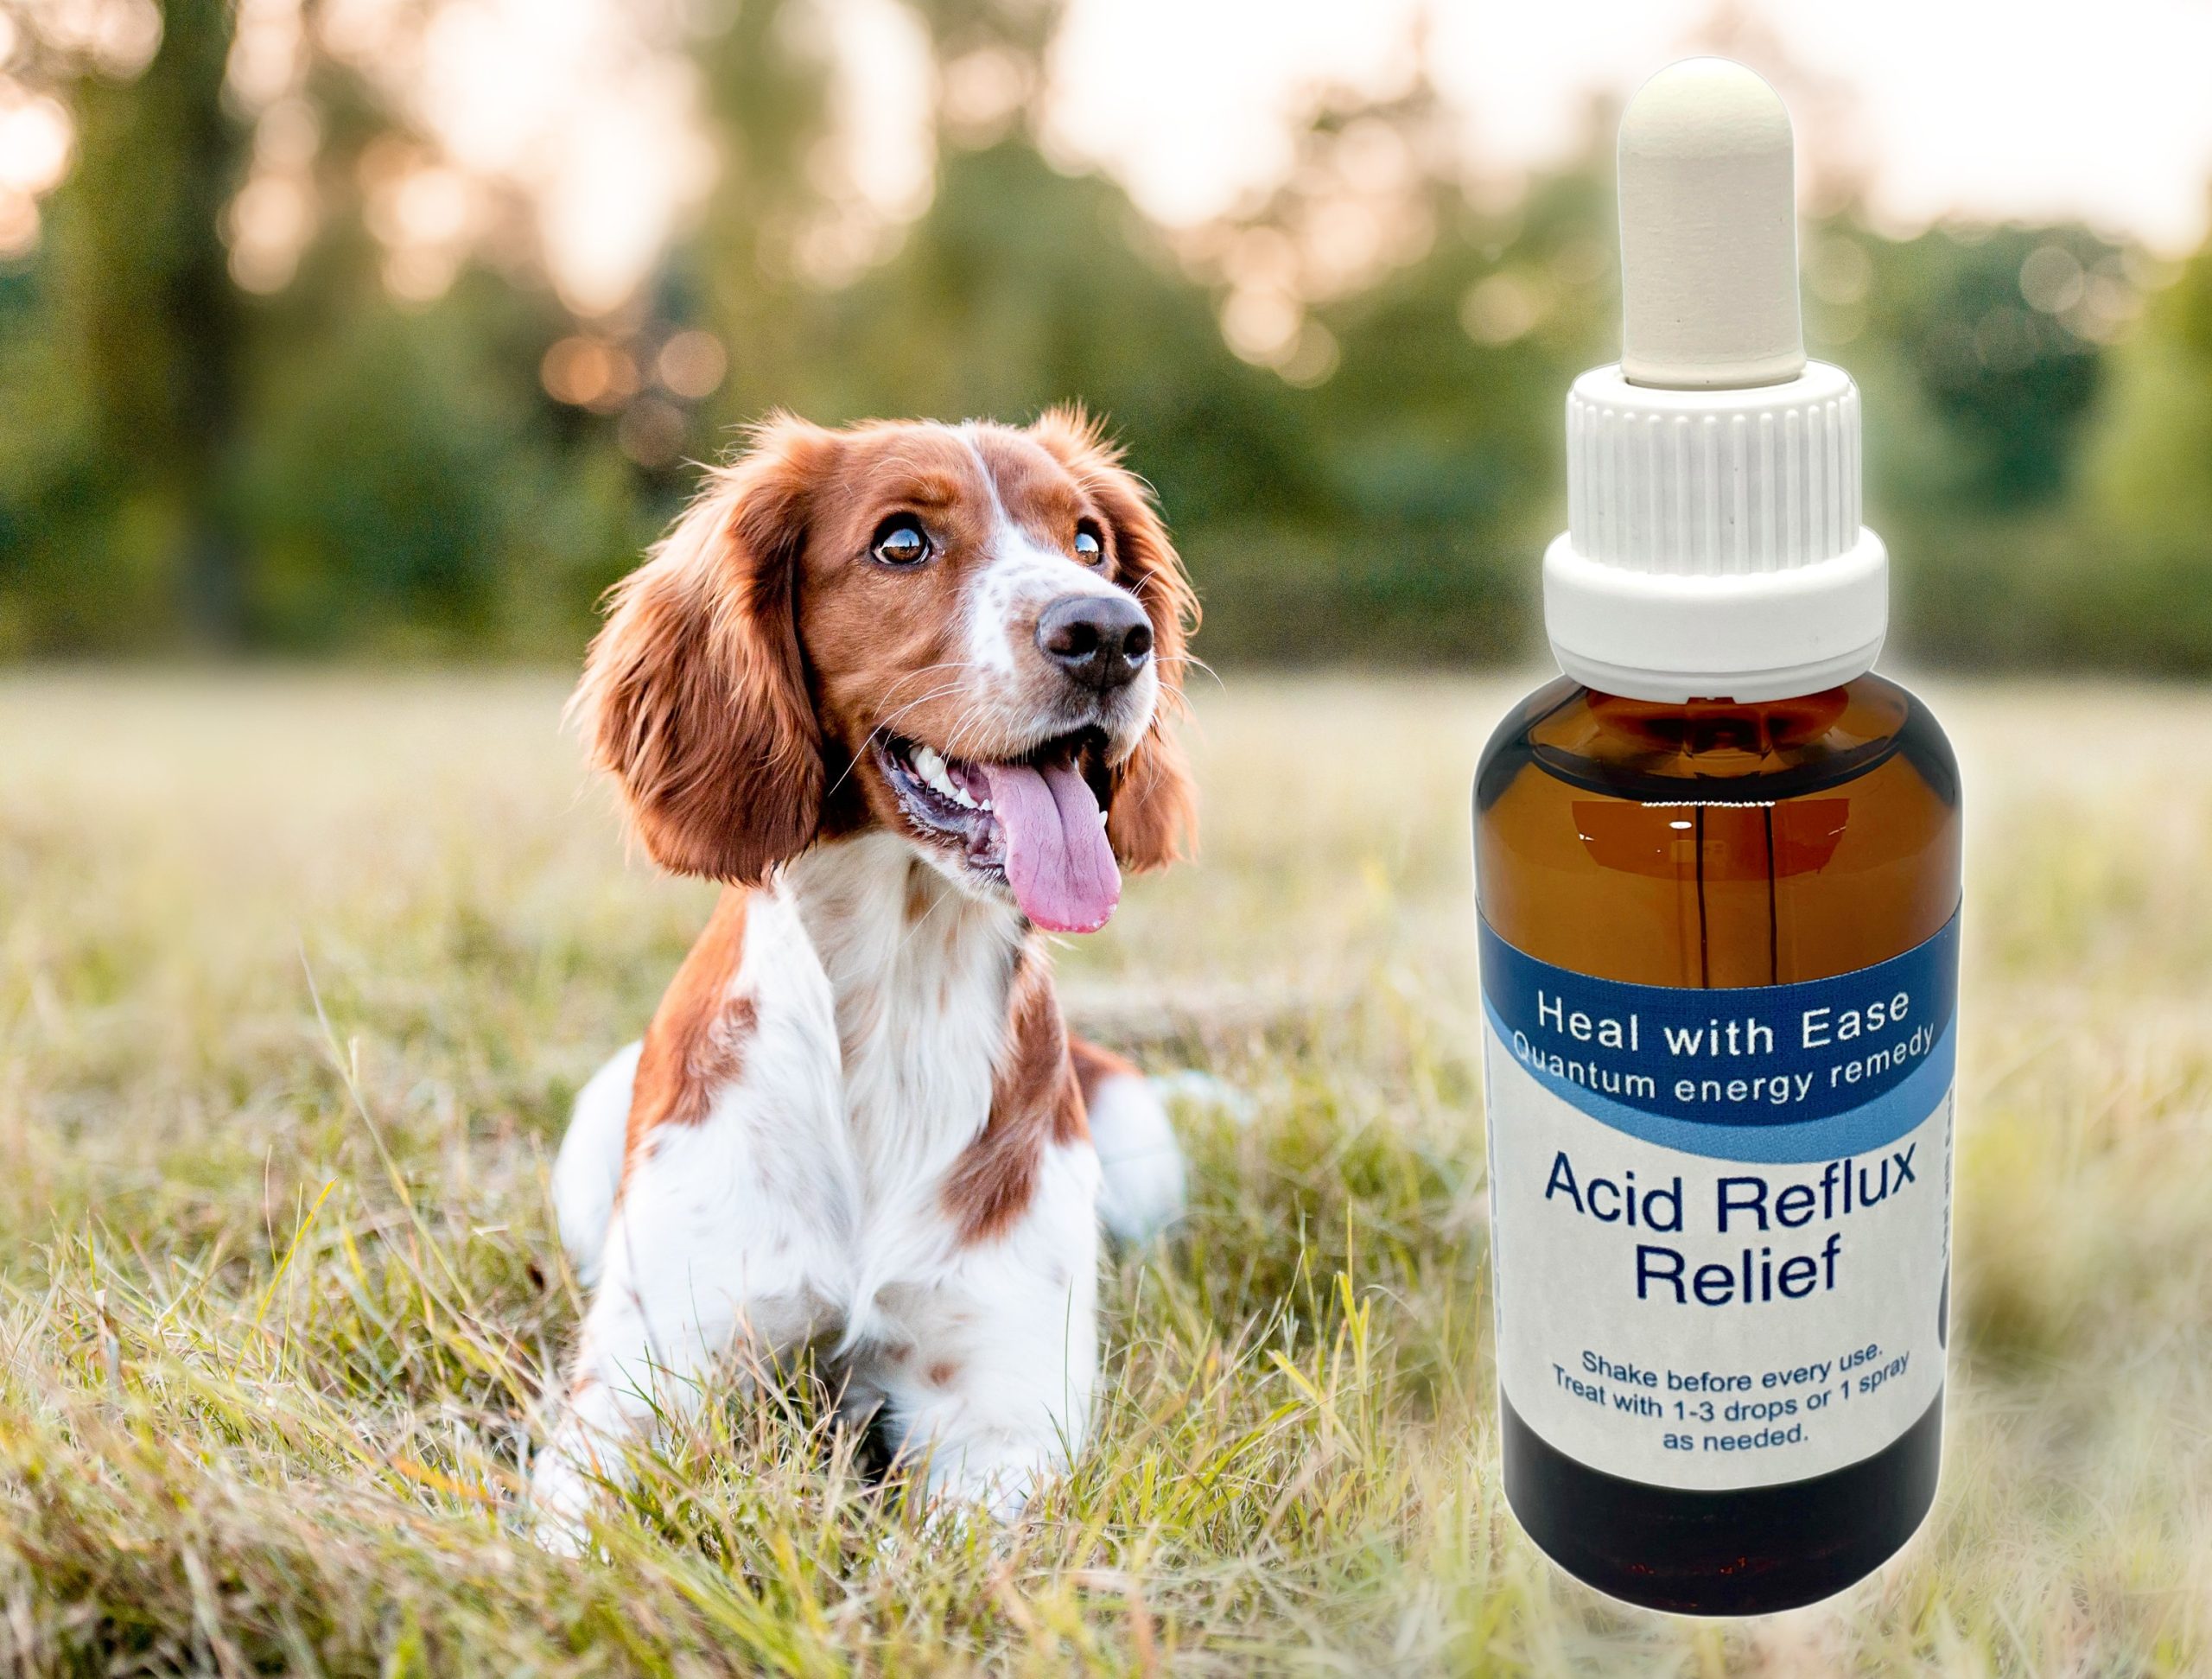 Acid Reflux Relief for Dogs